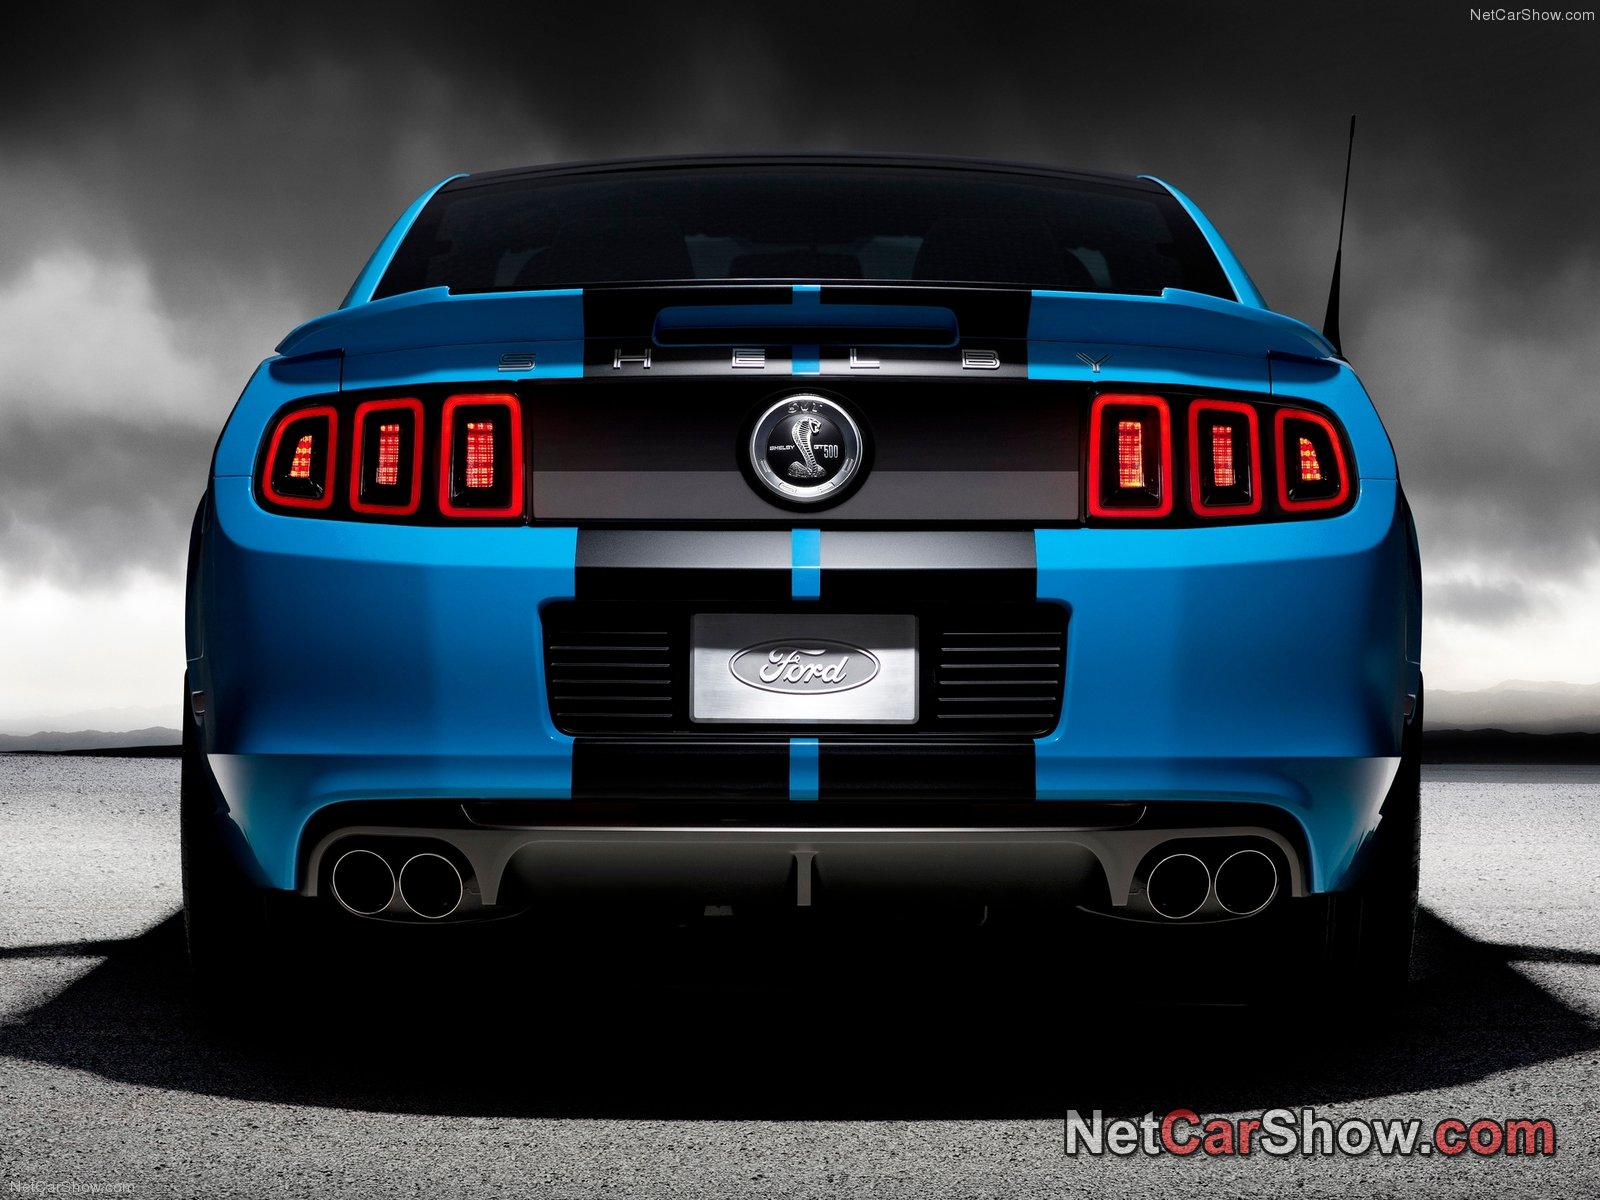 Ford-Mustang_Shelby_GT500_2013_1600x1200_wallpaper_0d